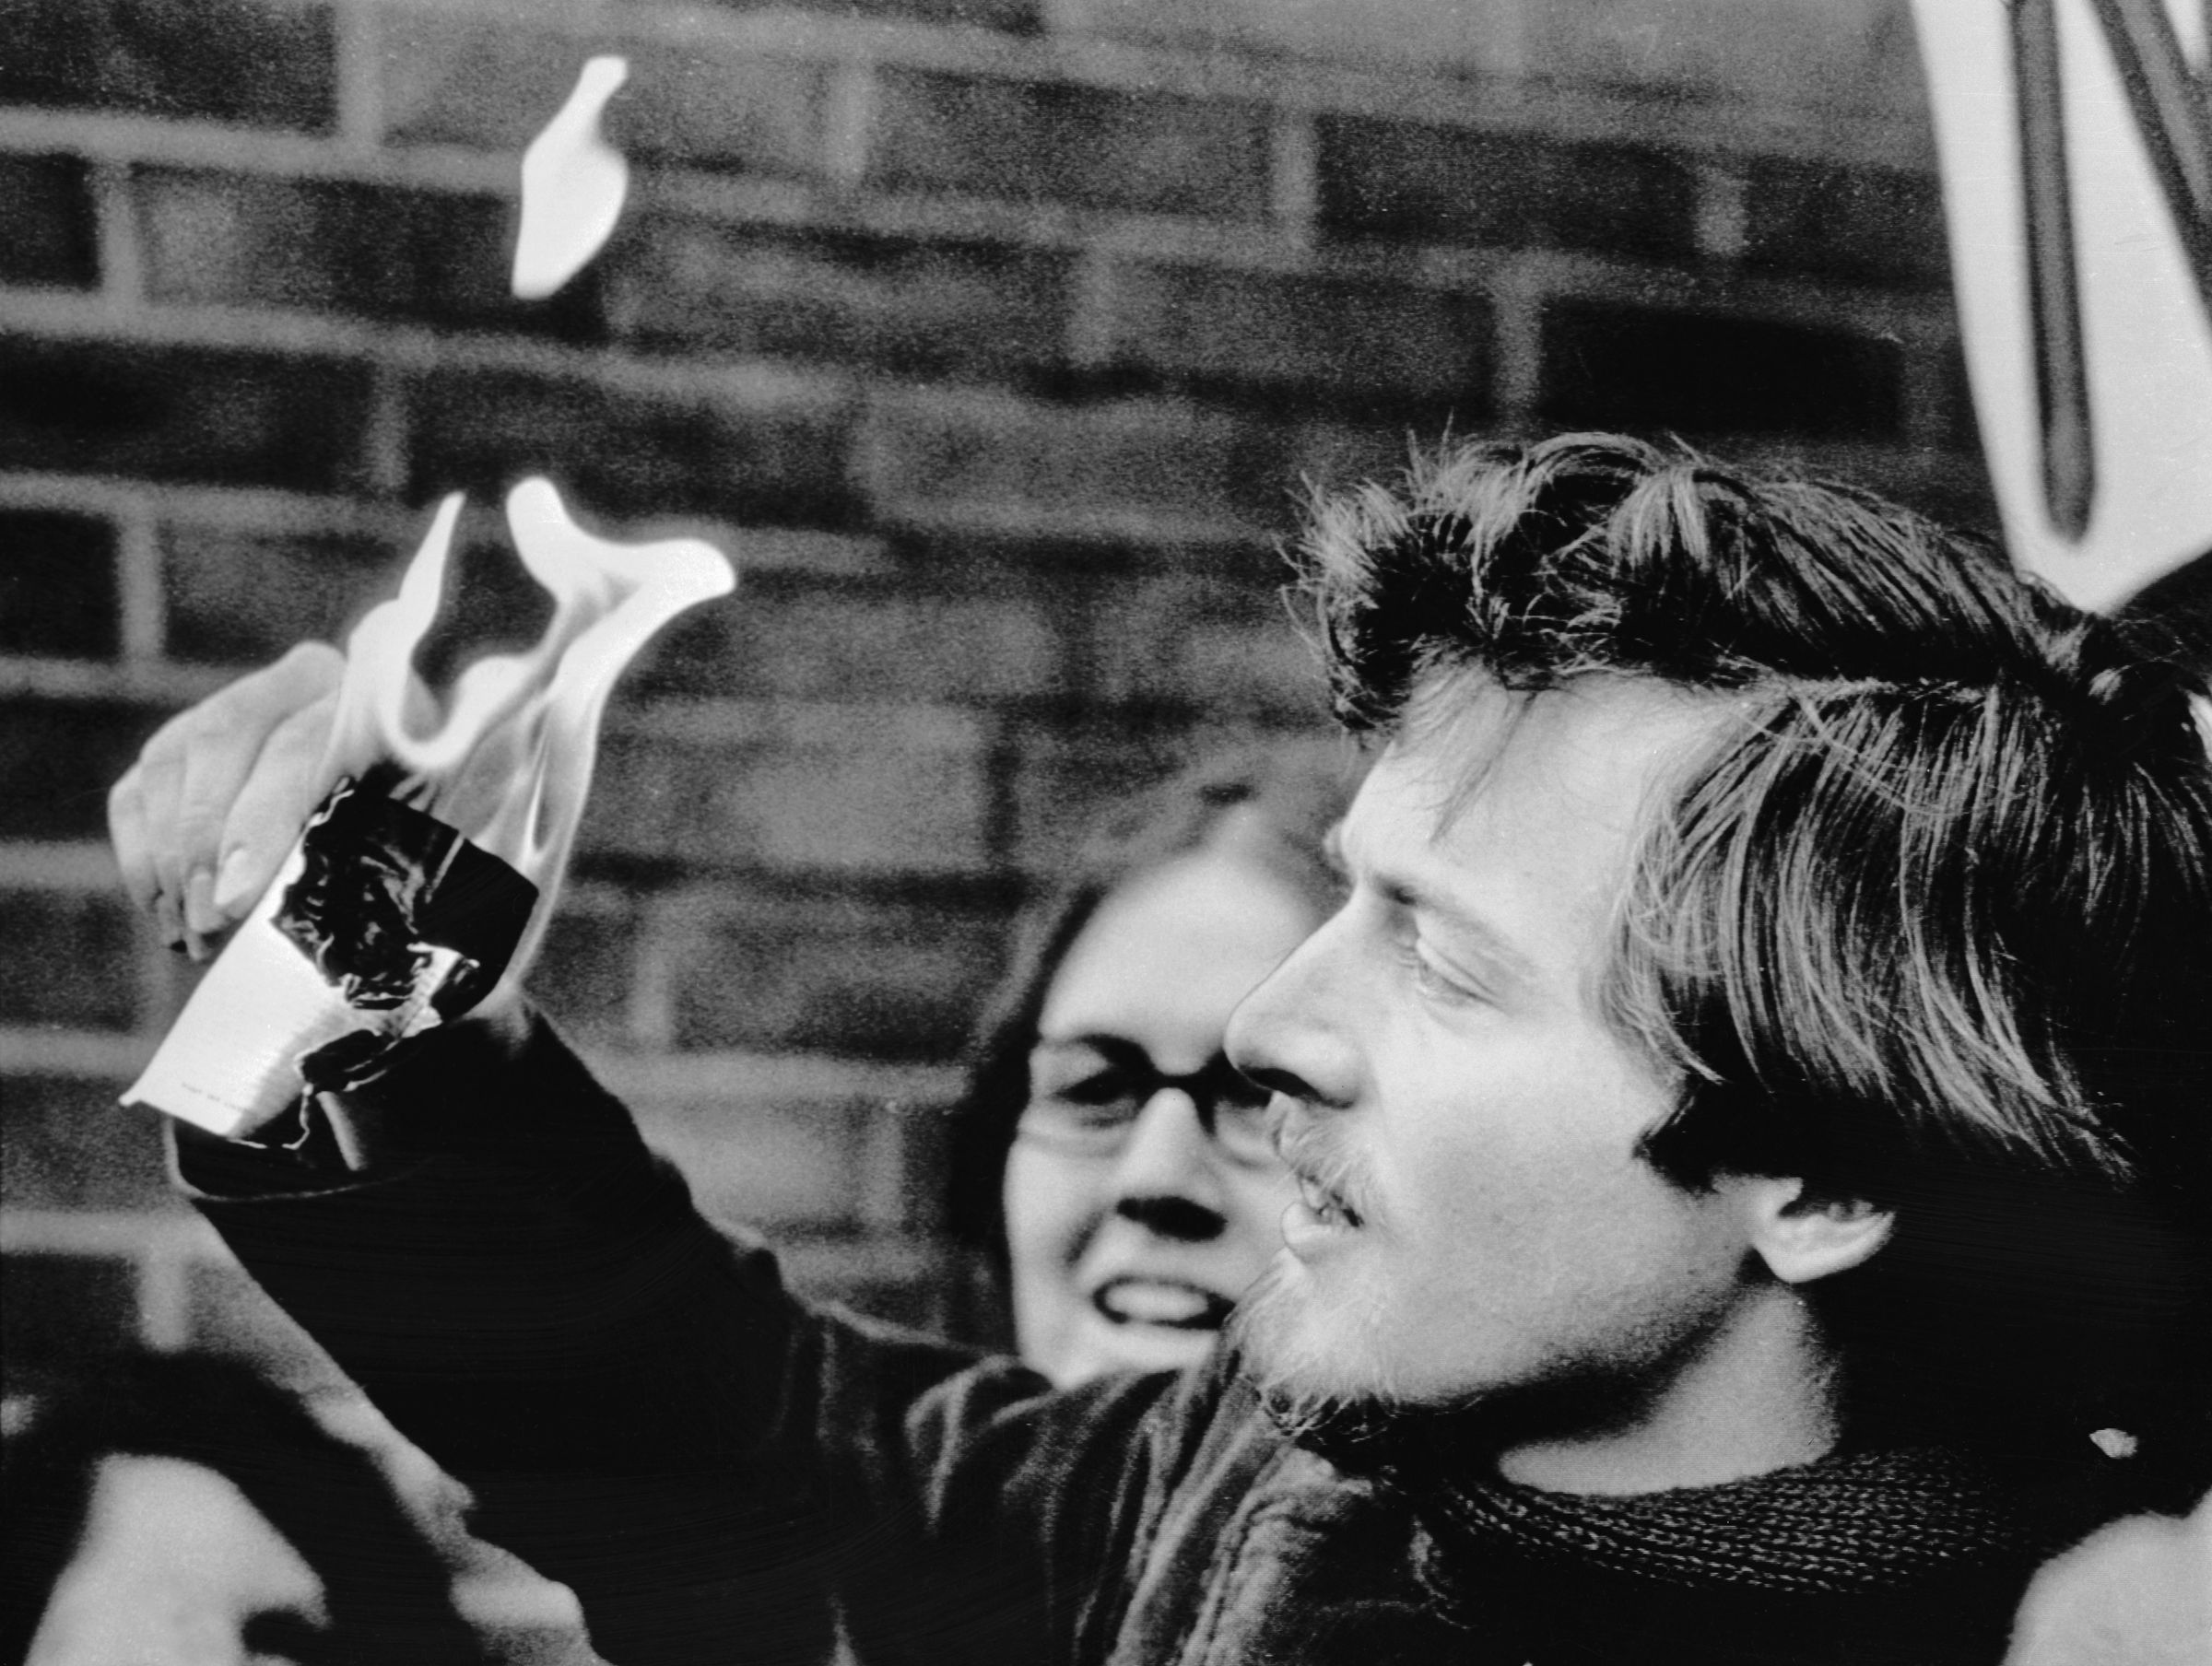 University of Wisconsin student Goddard C. Graves burns his draft card at the height of the Vietnam War protests.
